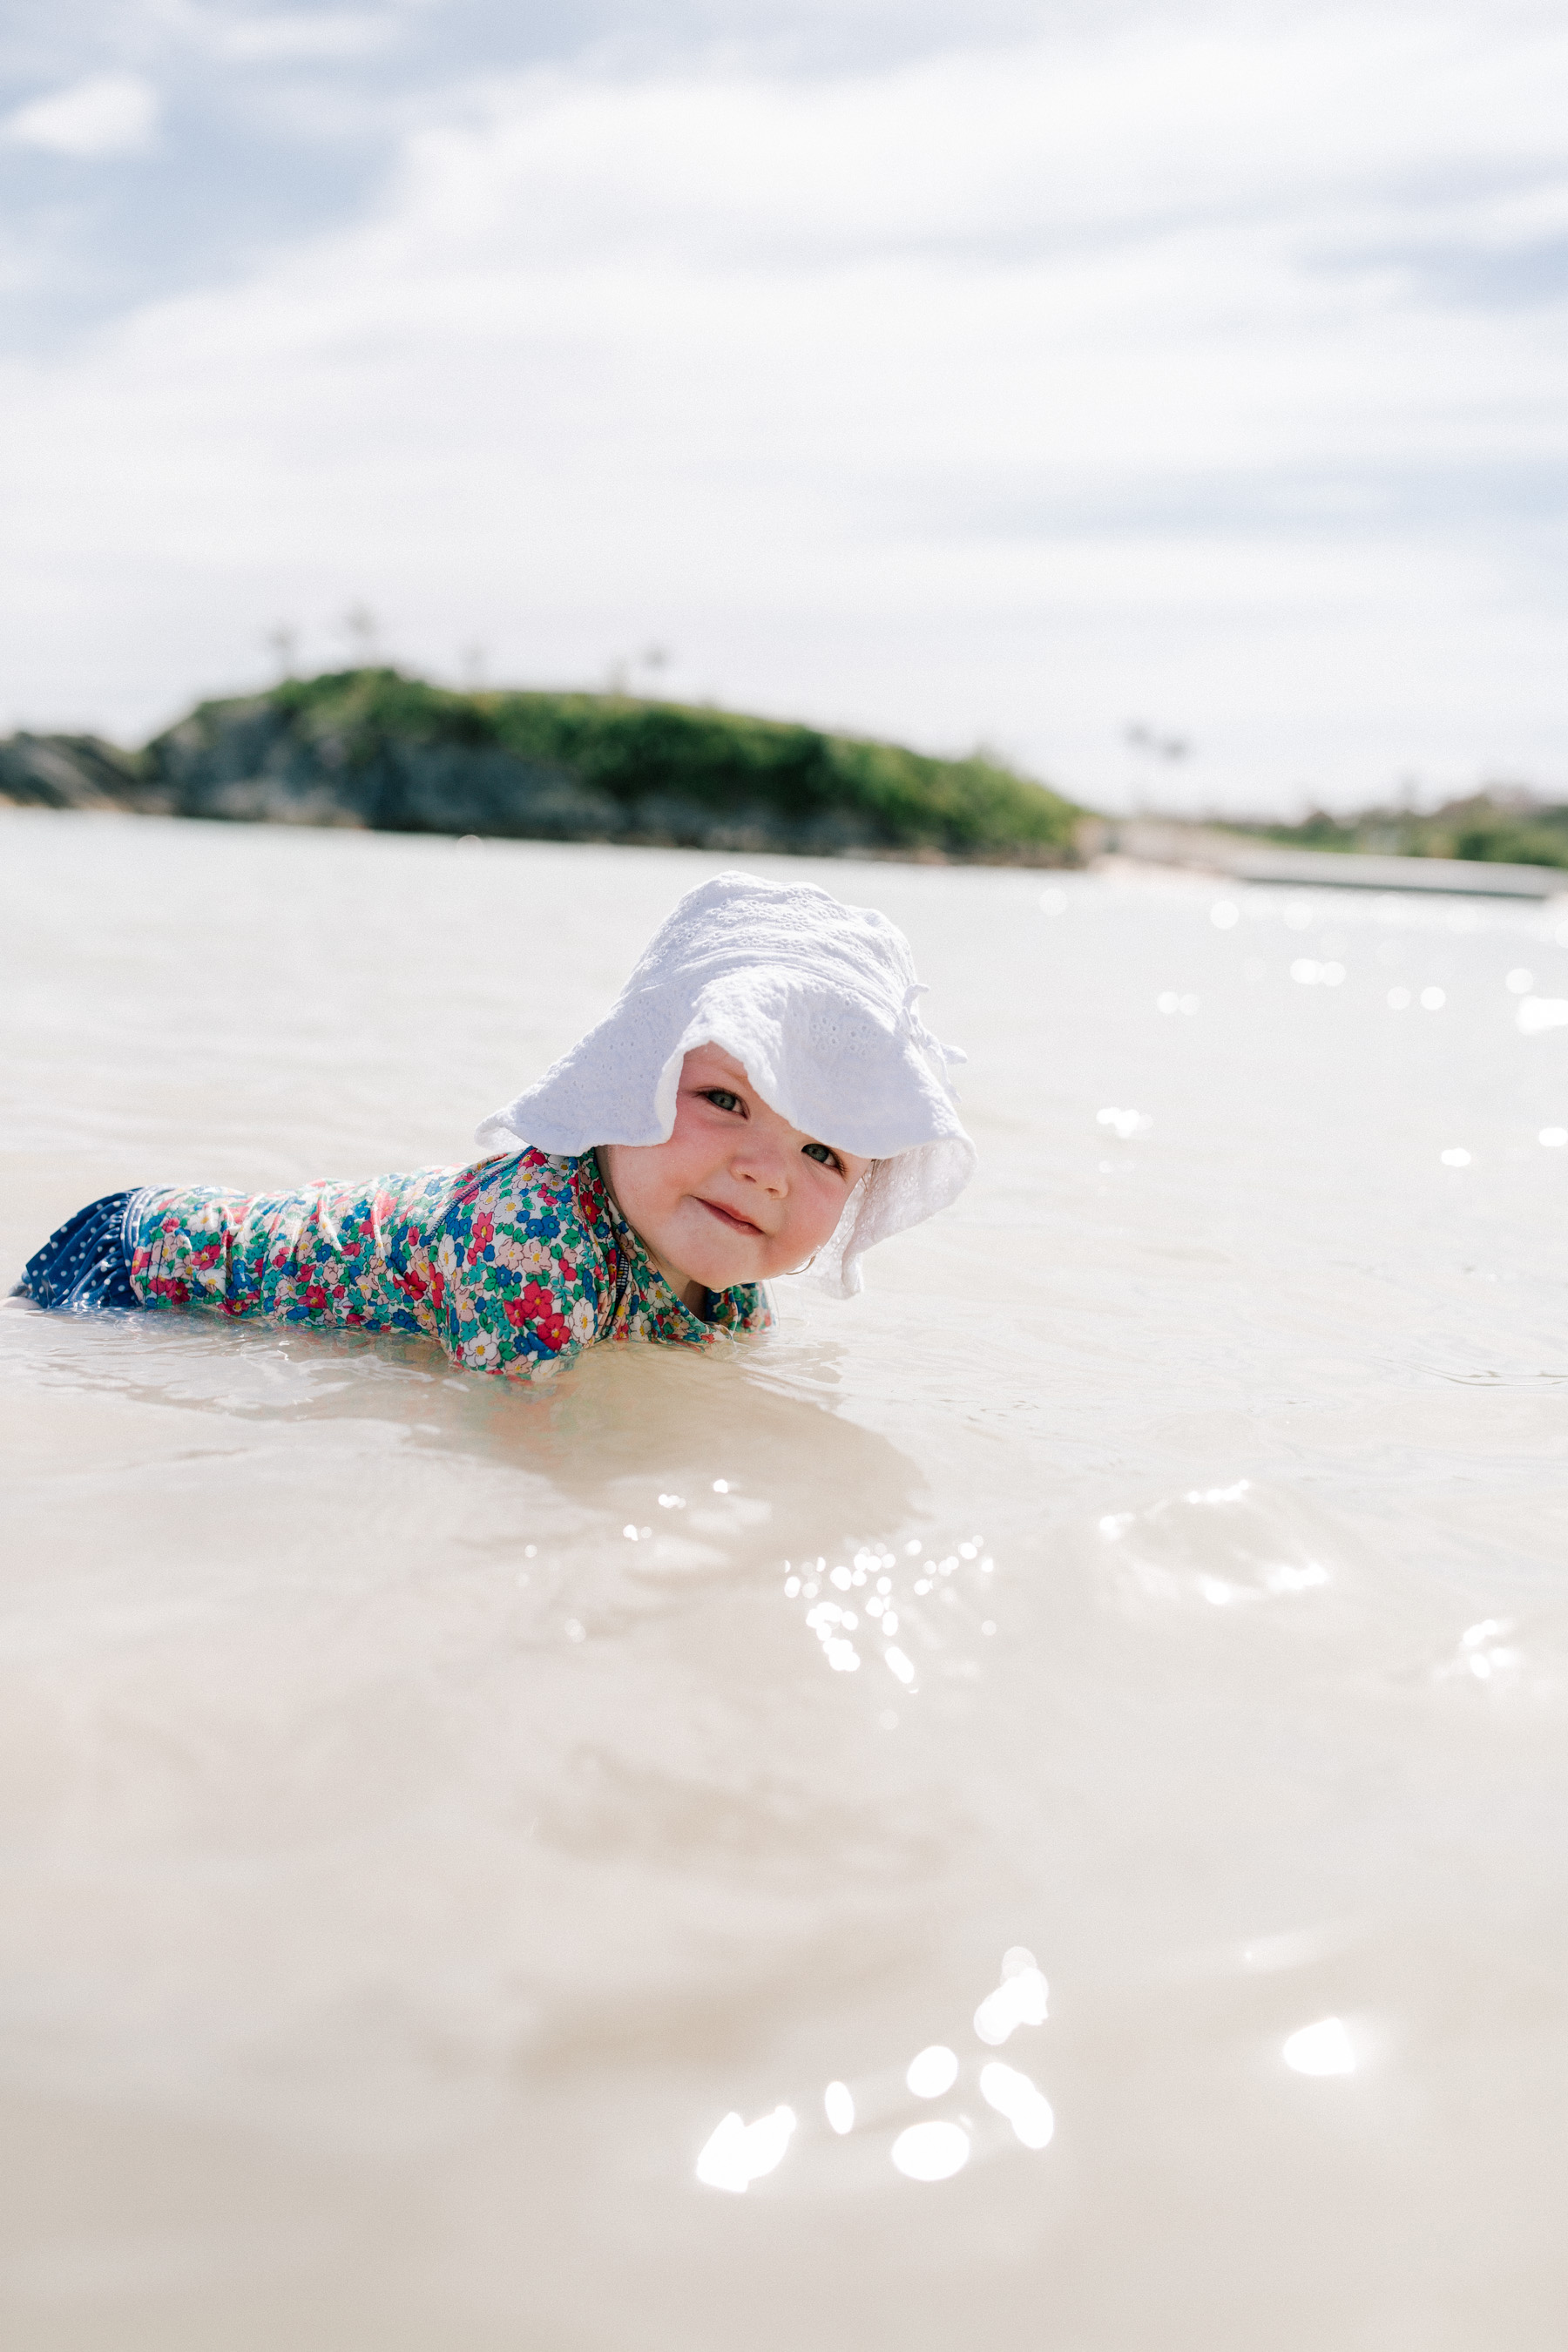 Baby Emma playing at a Private Bermudian Beach | Kelly in the City